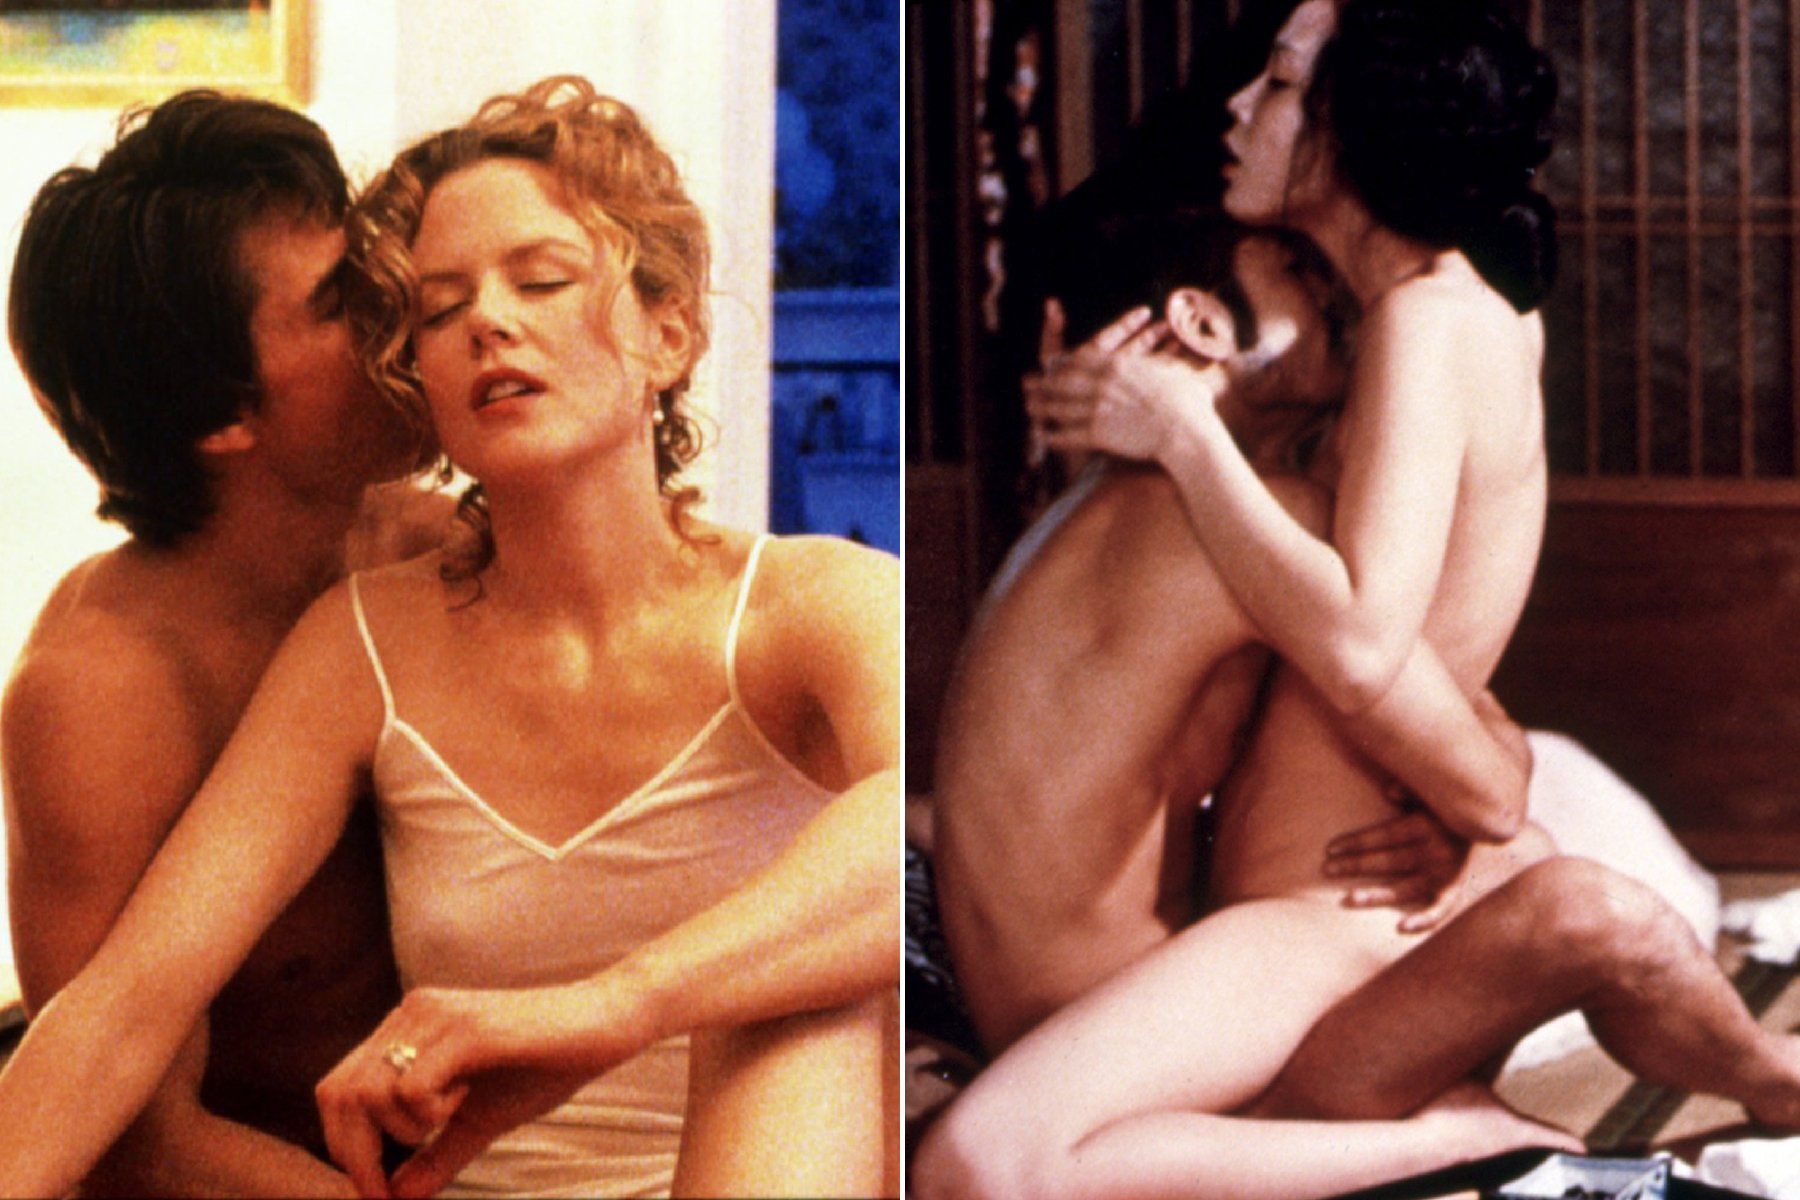 Controversial films featuring penetrative sex